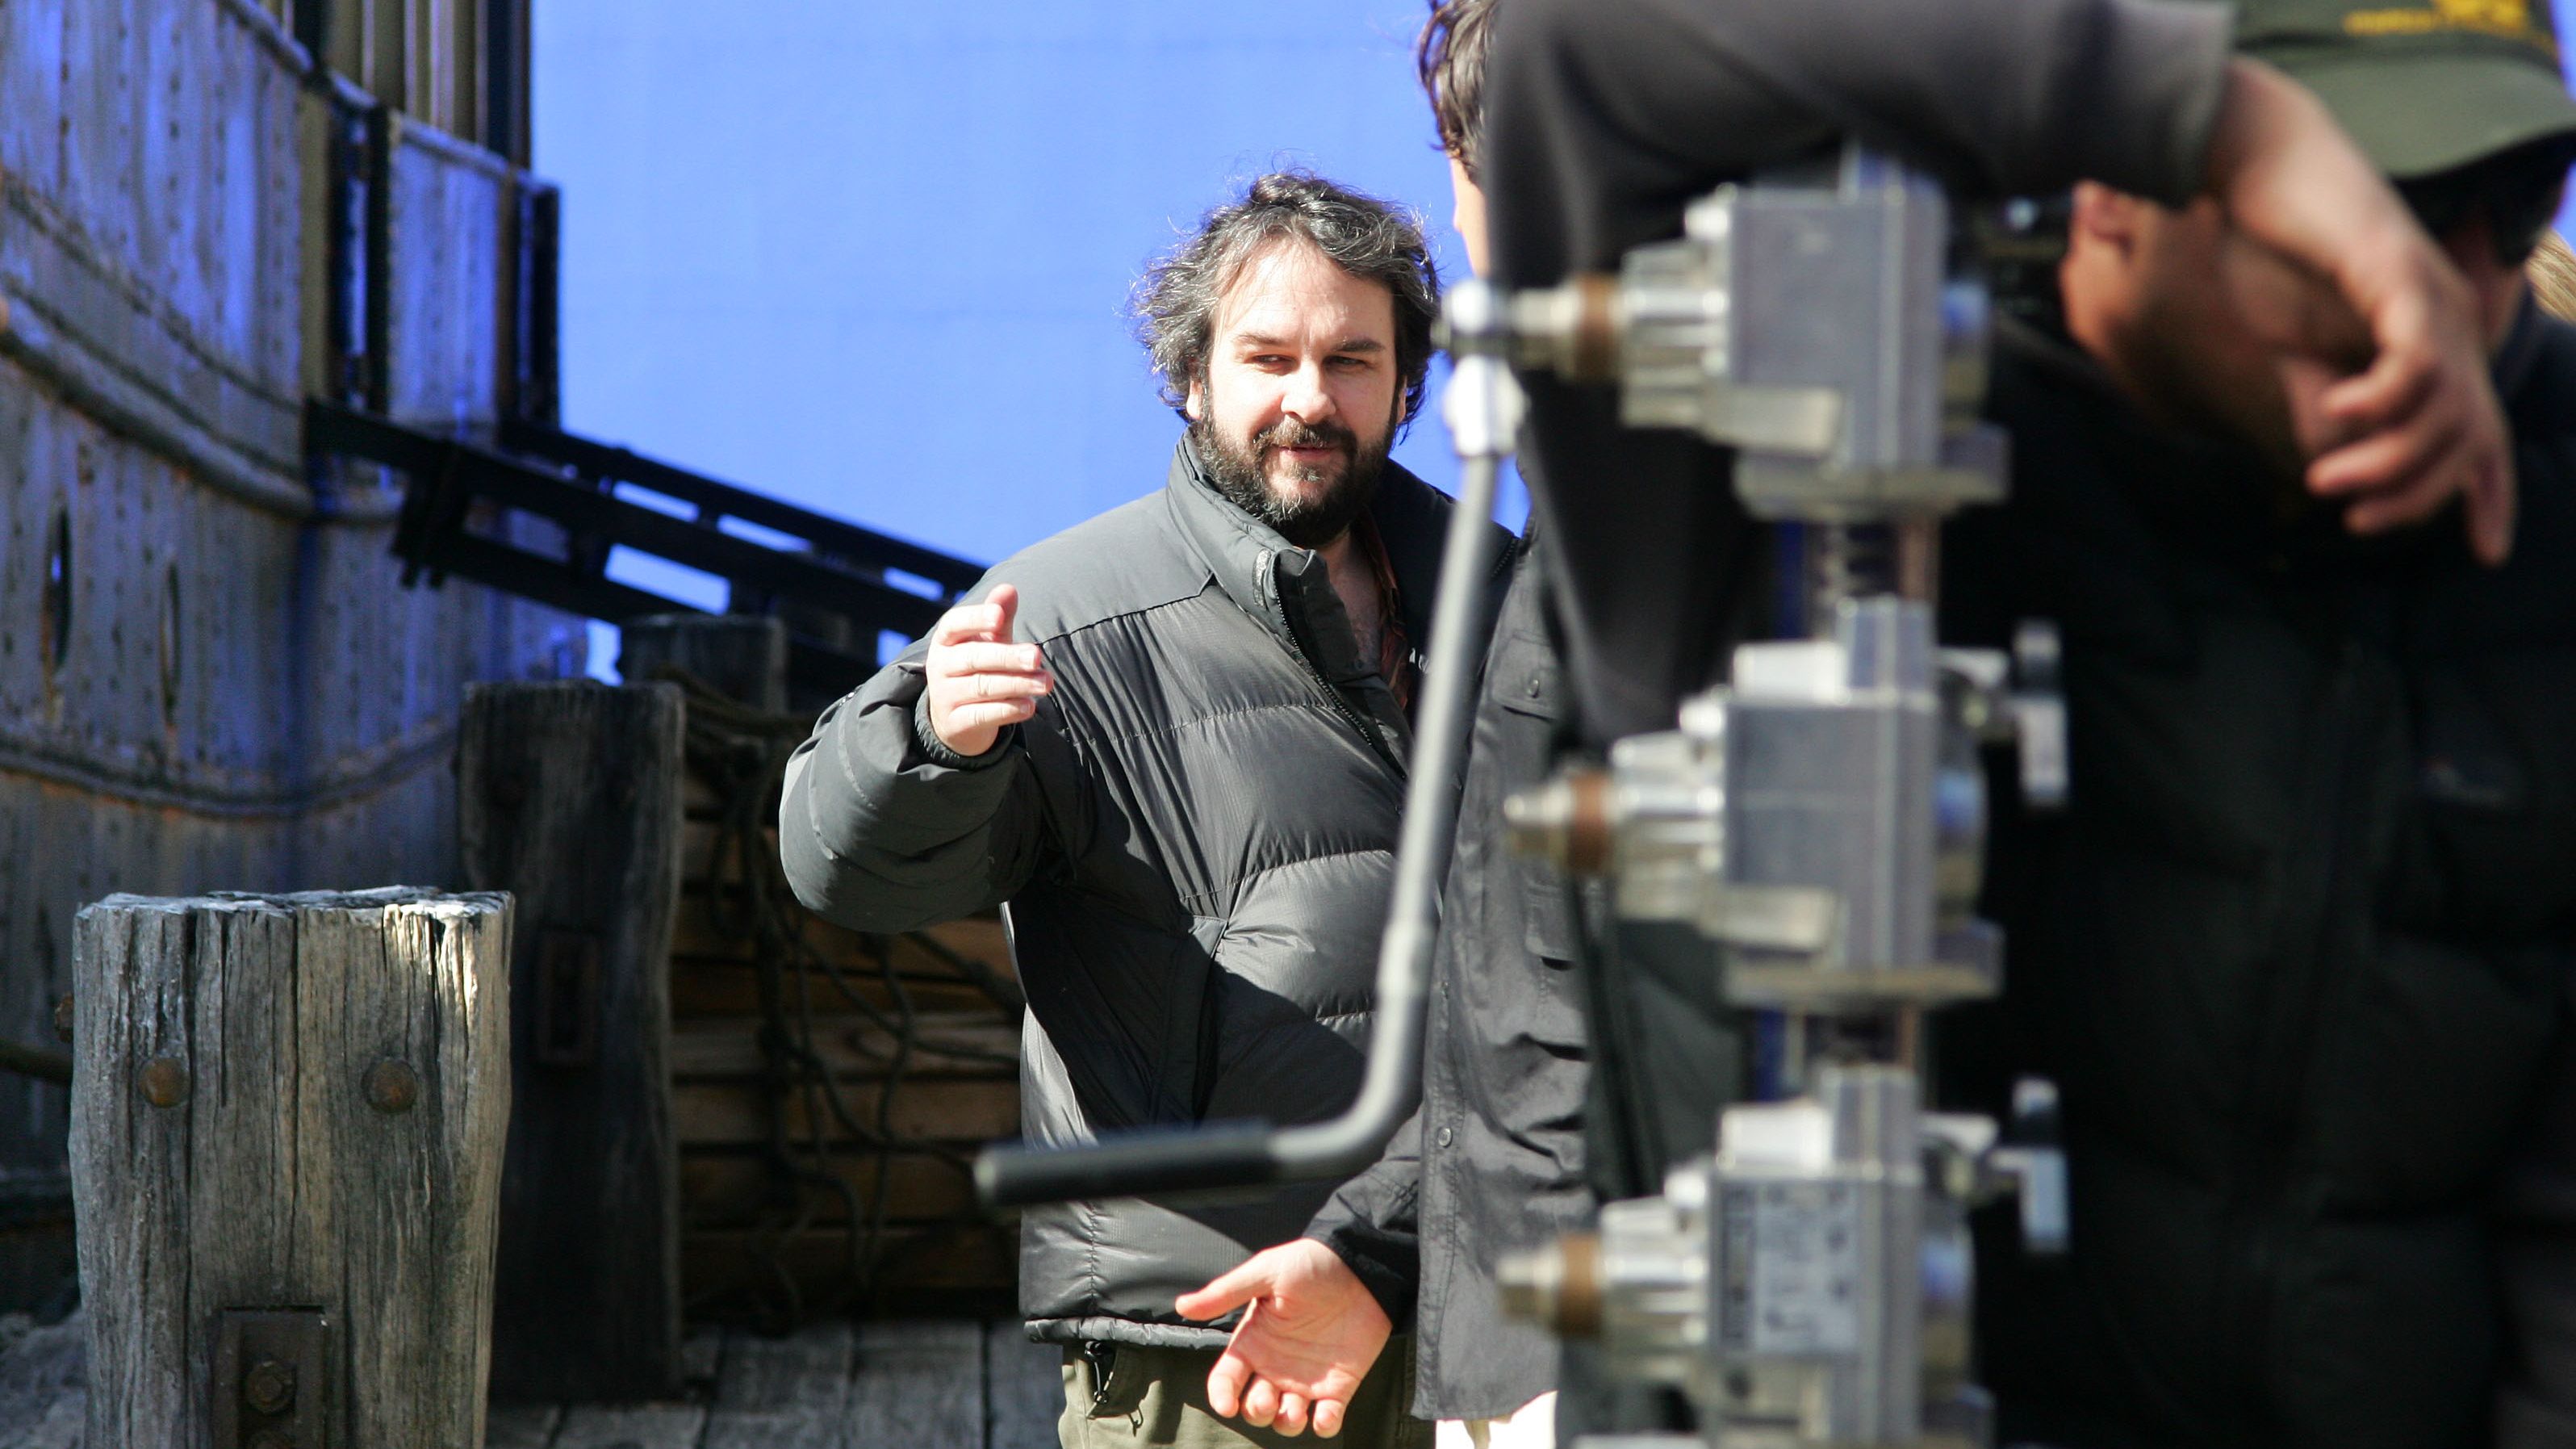 Oscar-winning director Peter Jackson made his "Lord of the Rings" movies in his native New Zealand.